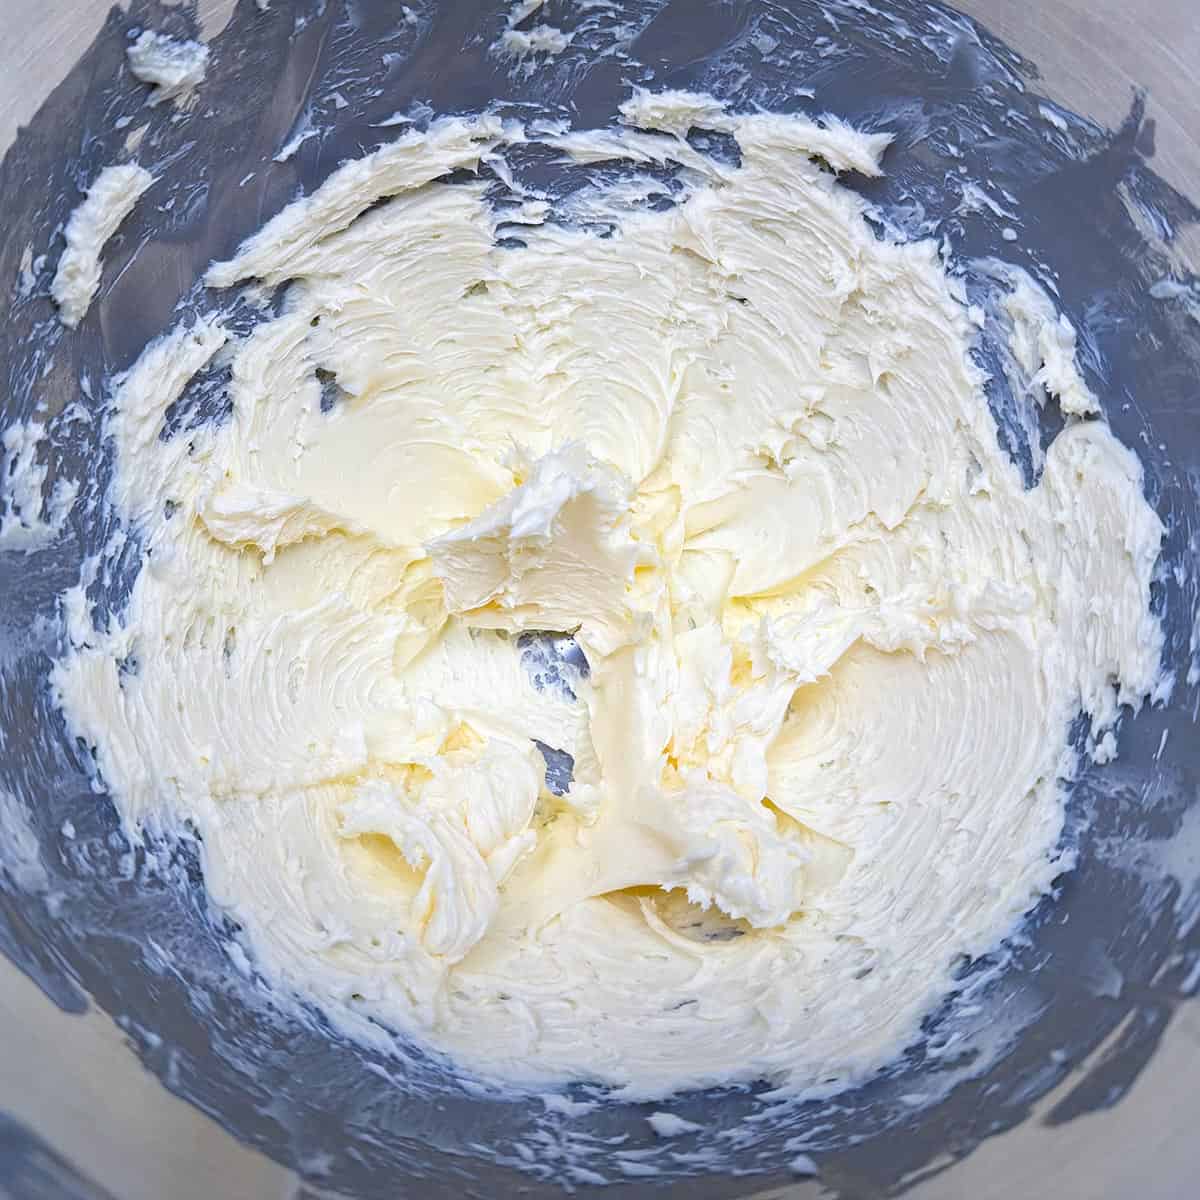 Creamed butter with soft peaks.